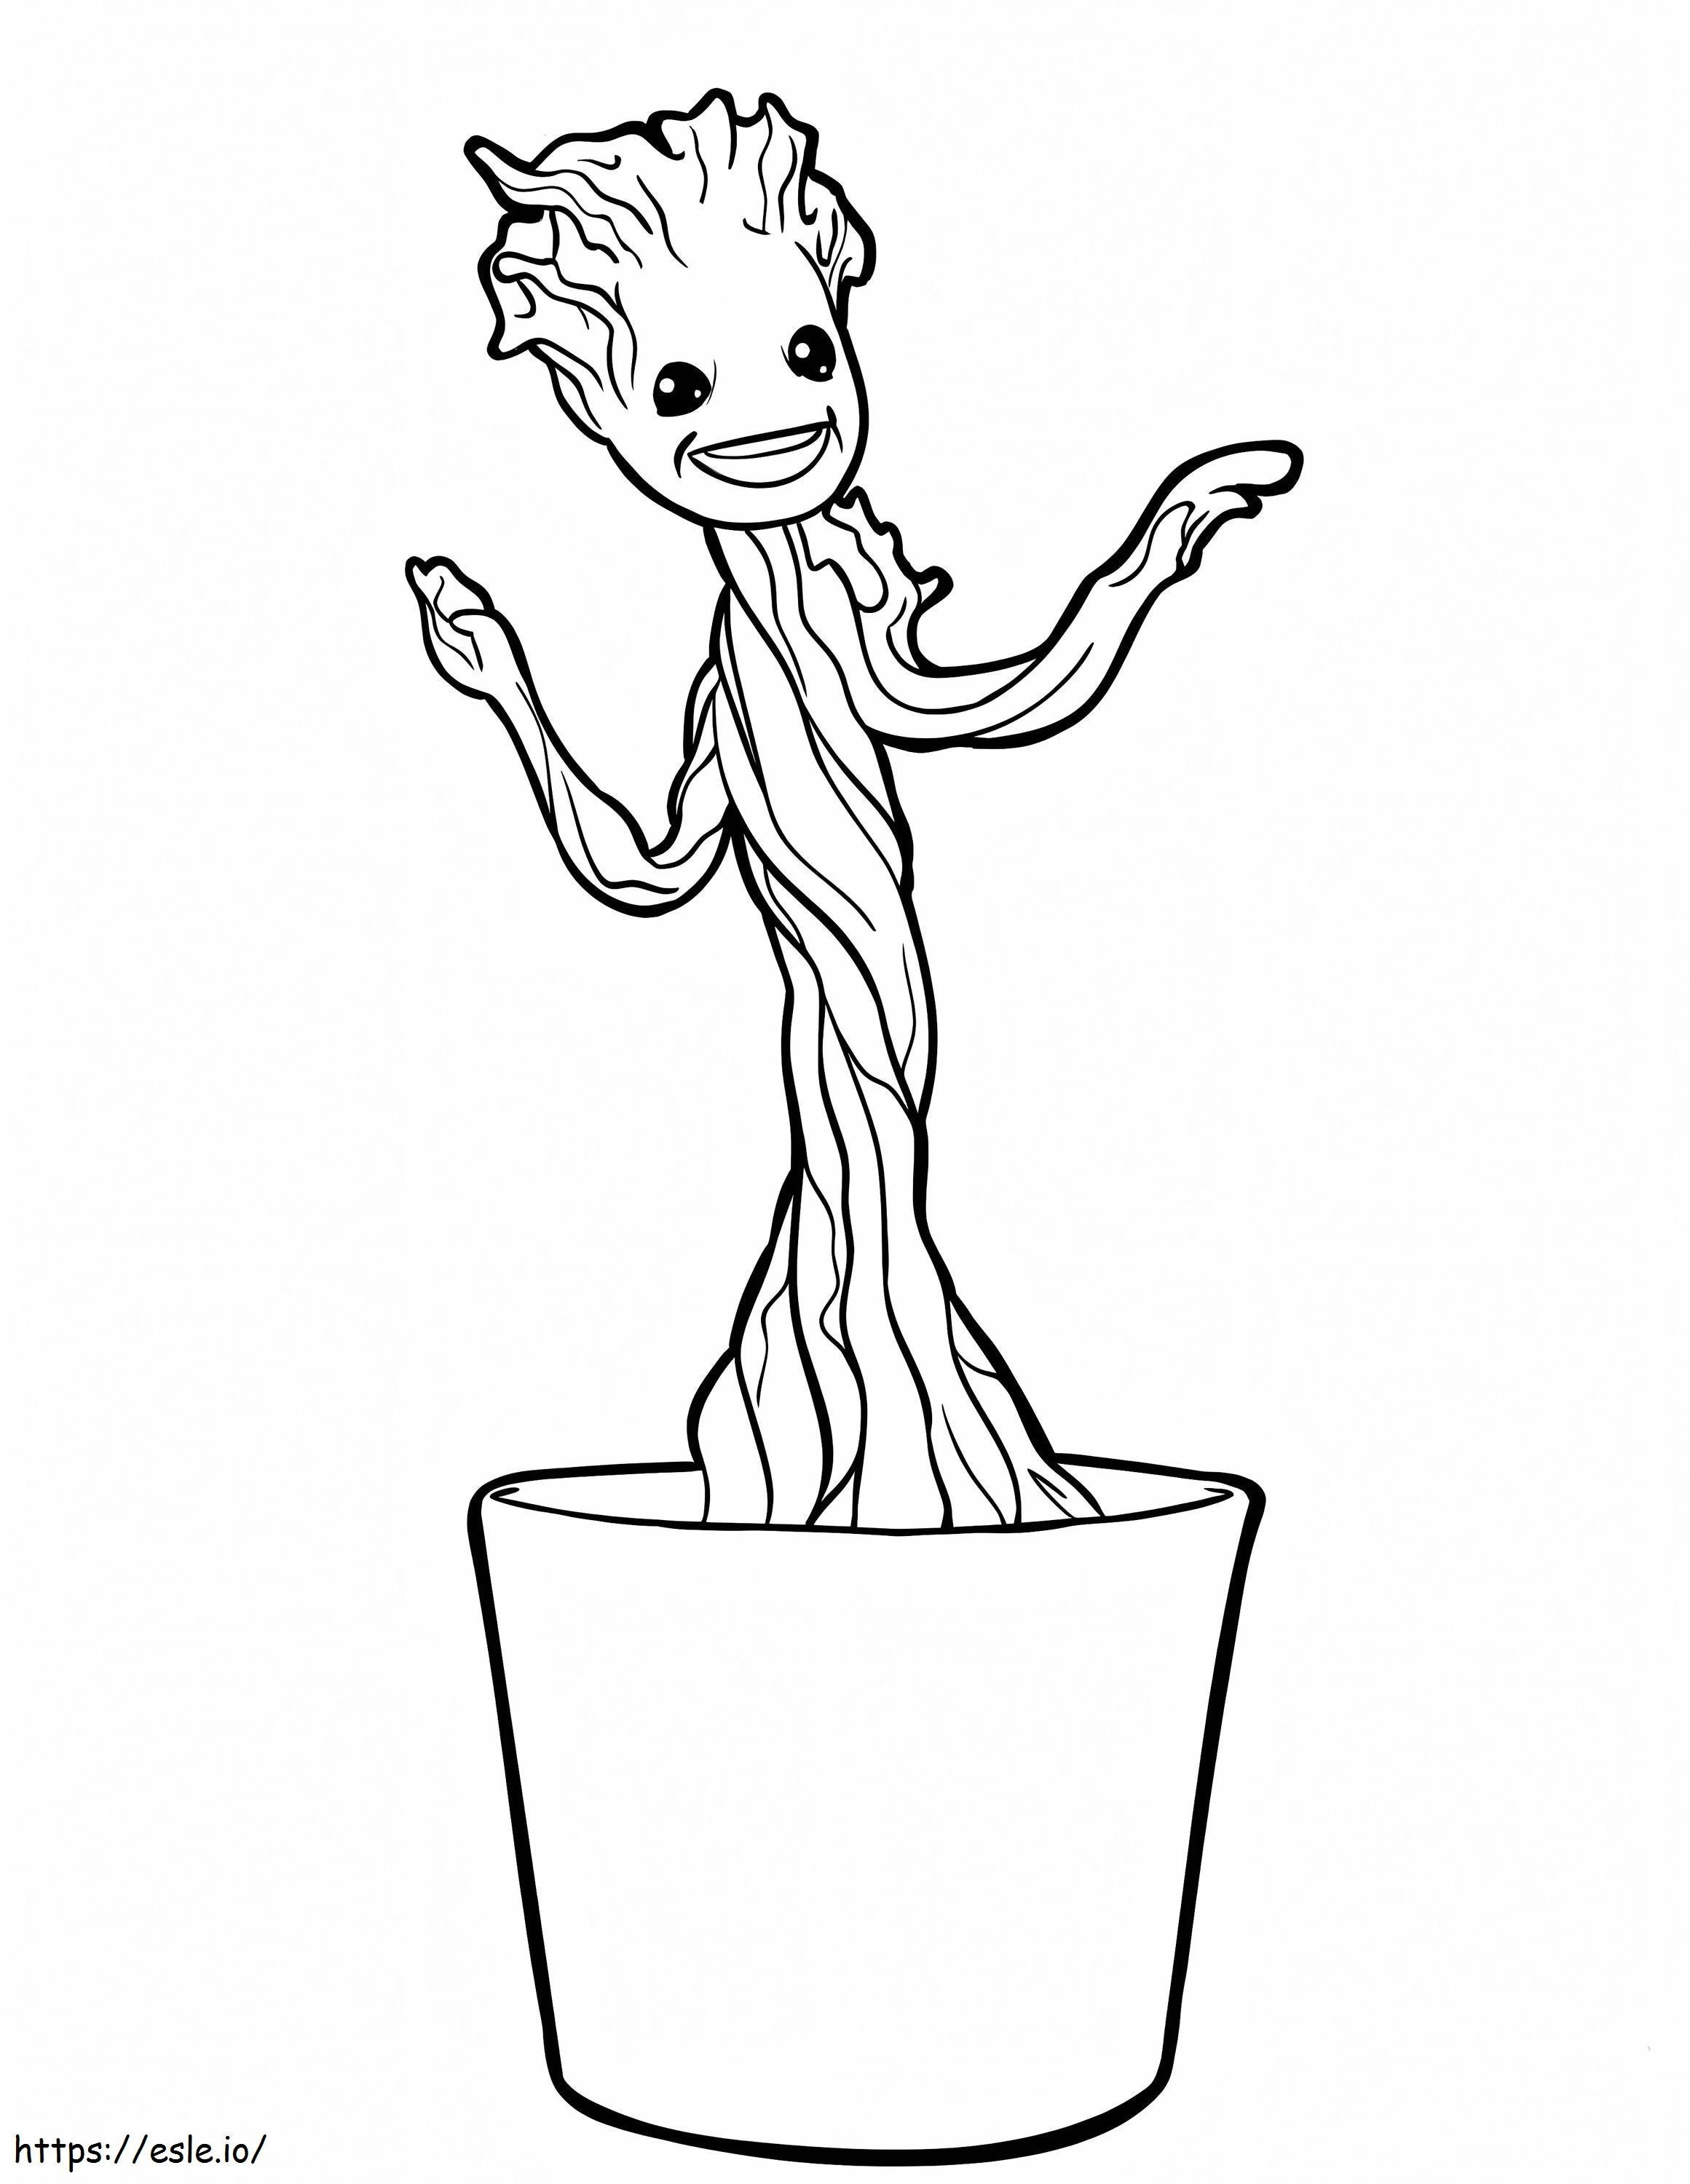 Little Groot In Vase coloring page